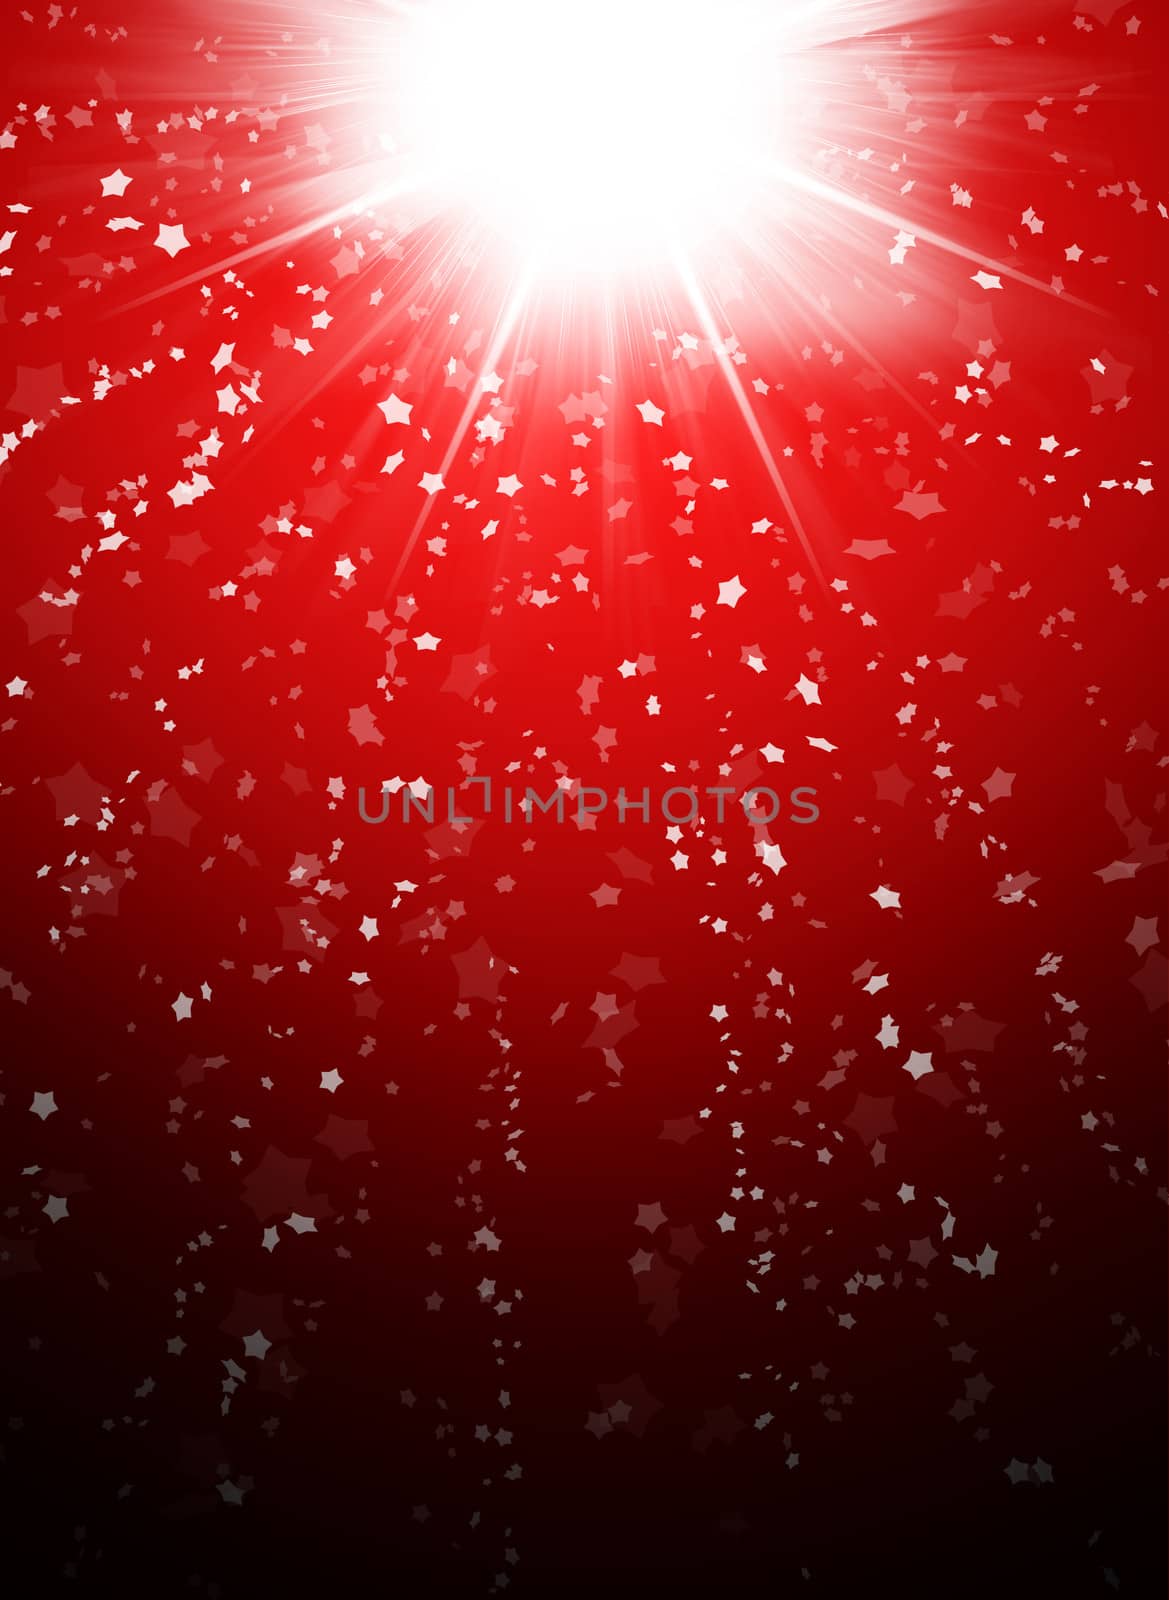 Snowflakes on abstract red background by cherezoff